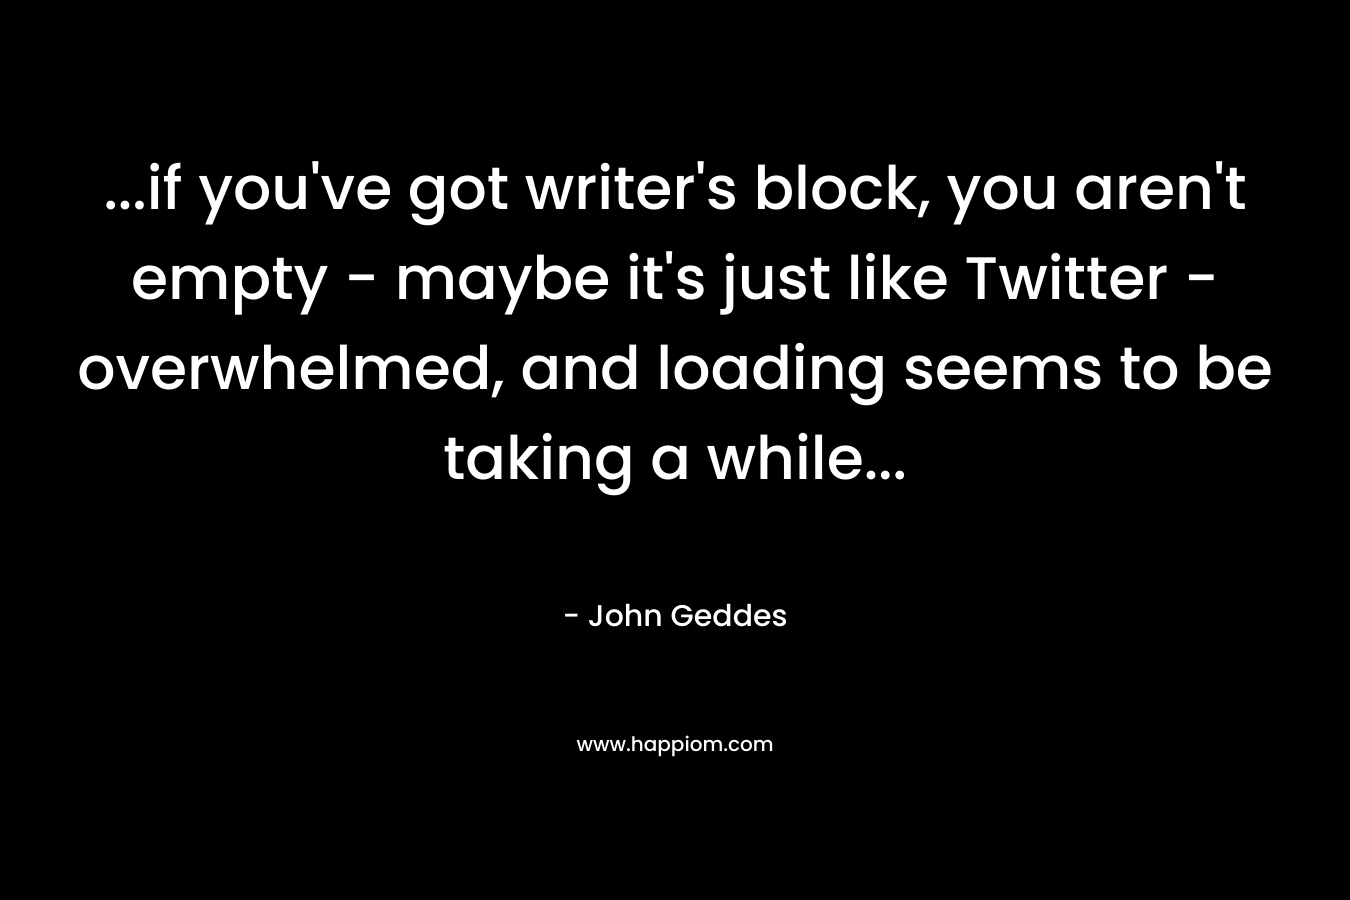 …if you’ve got writer’s block, you aren’t empty – maybe it’s just like Twitter – overwhelmed, and loading seems to be taking a while… – John Geddes